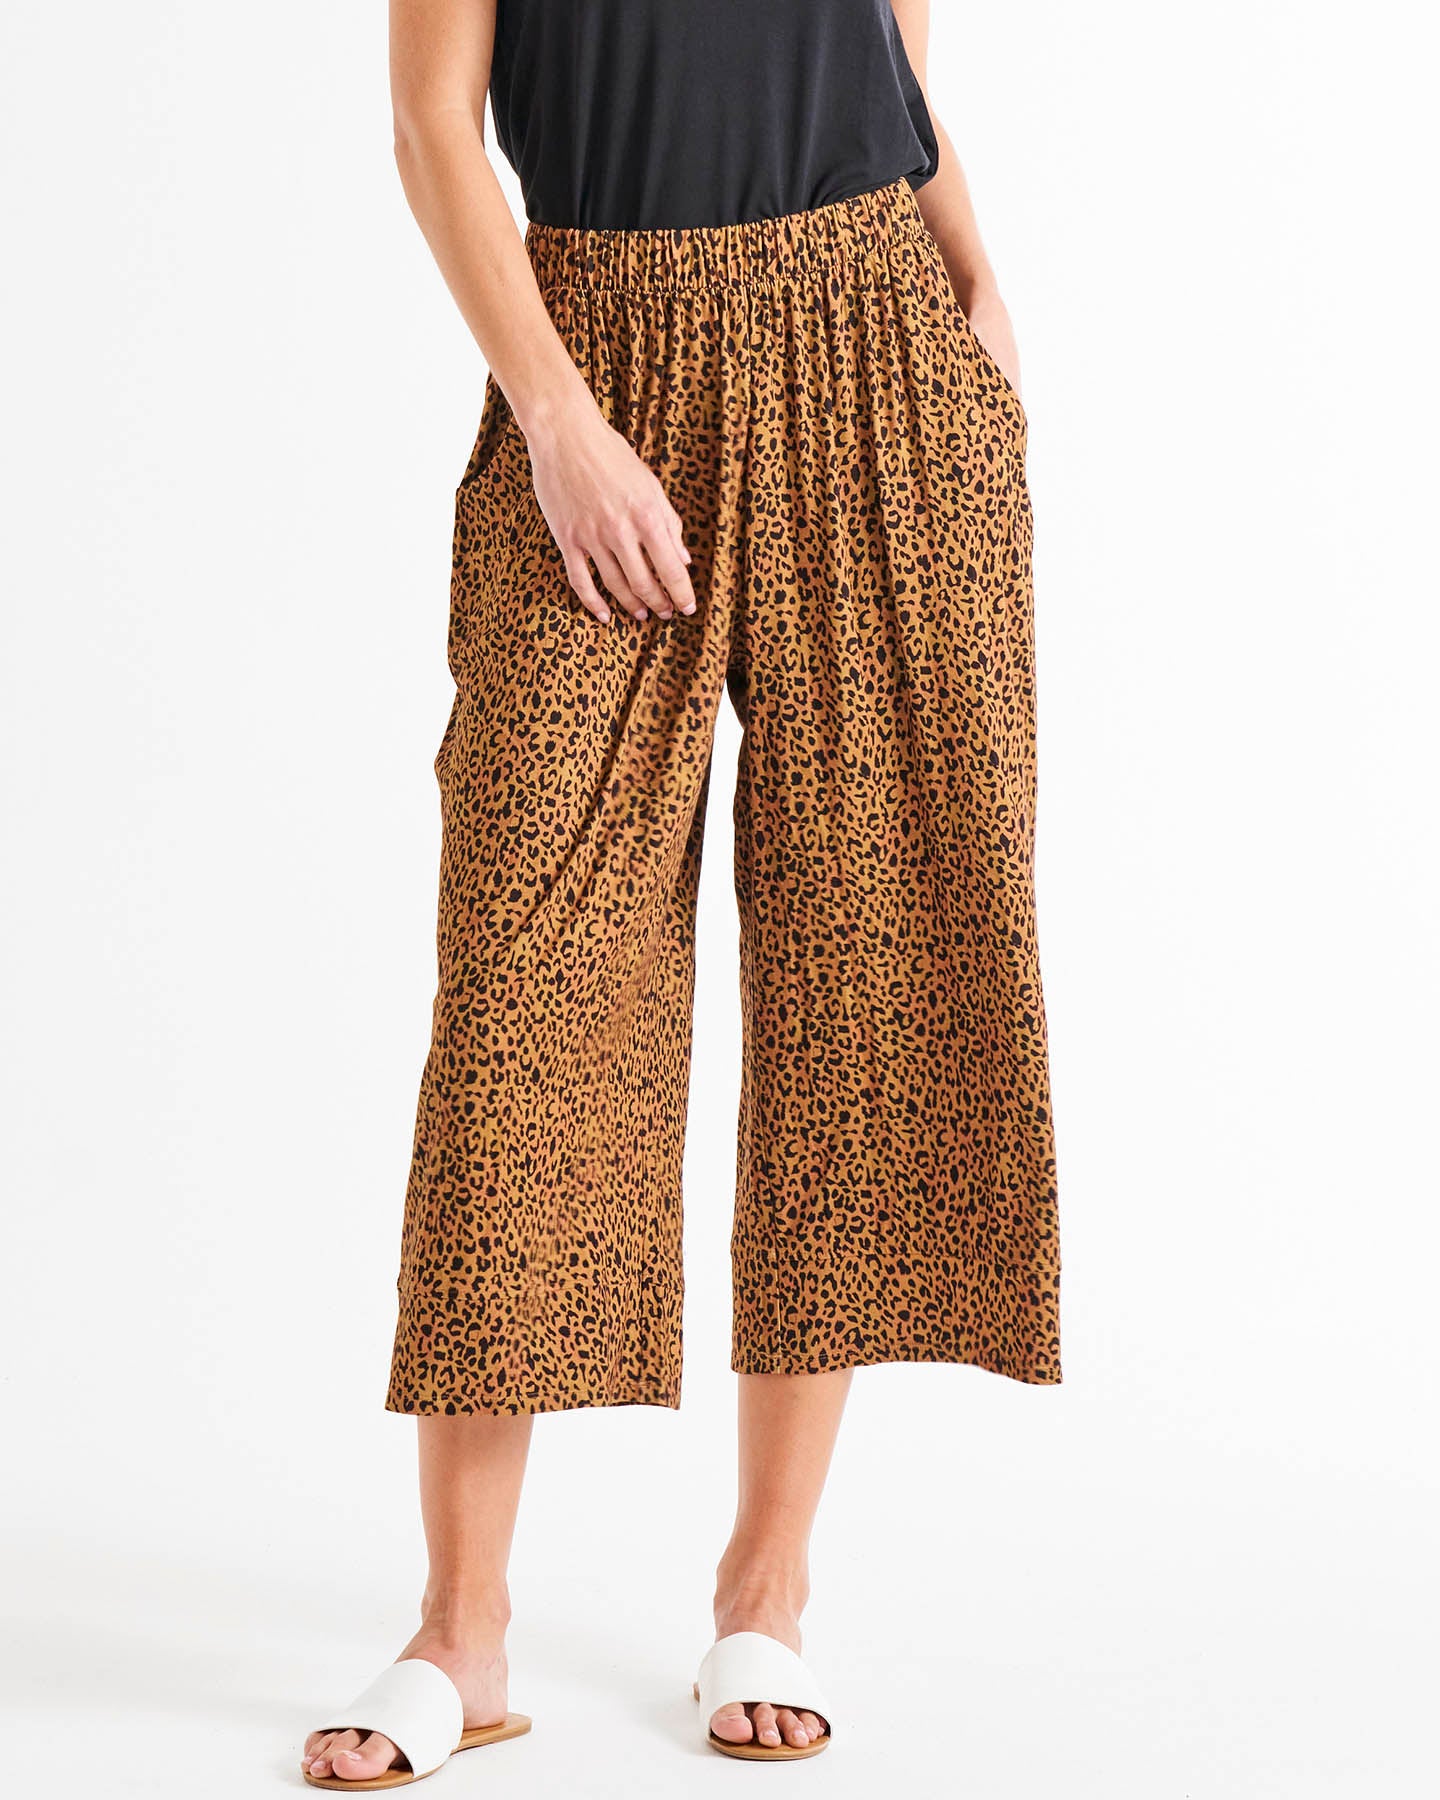 Bianca Stretchy High Rise Relaxed Pant - Wild Leopard Print